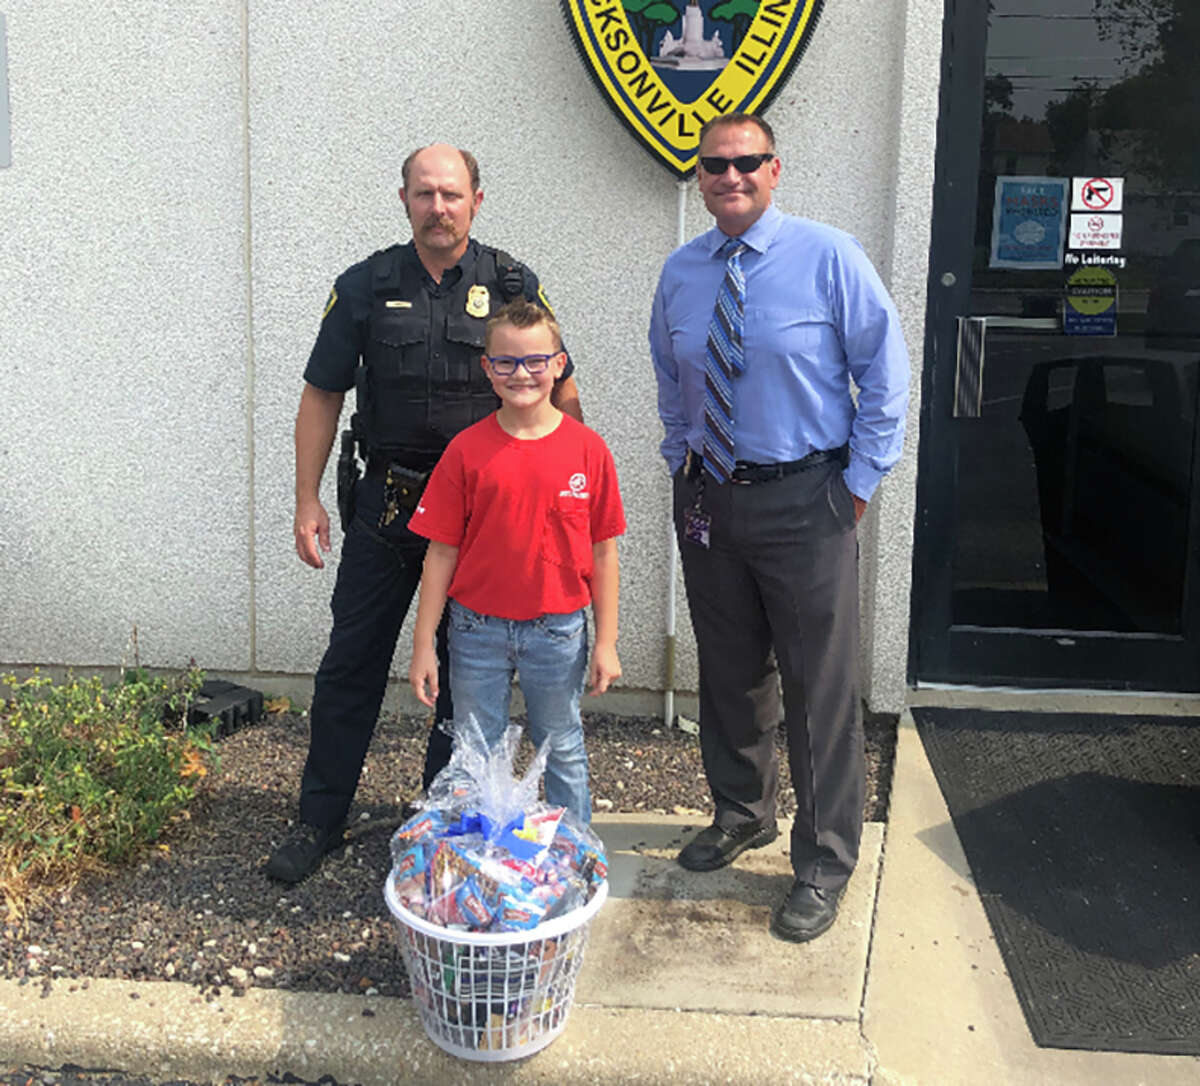 Jacksonville Police Department was given a gift basket by Buchheit retail department manager Sue Radkiewicz’s grandson, Jackson.